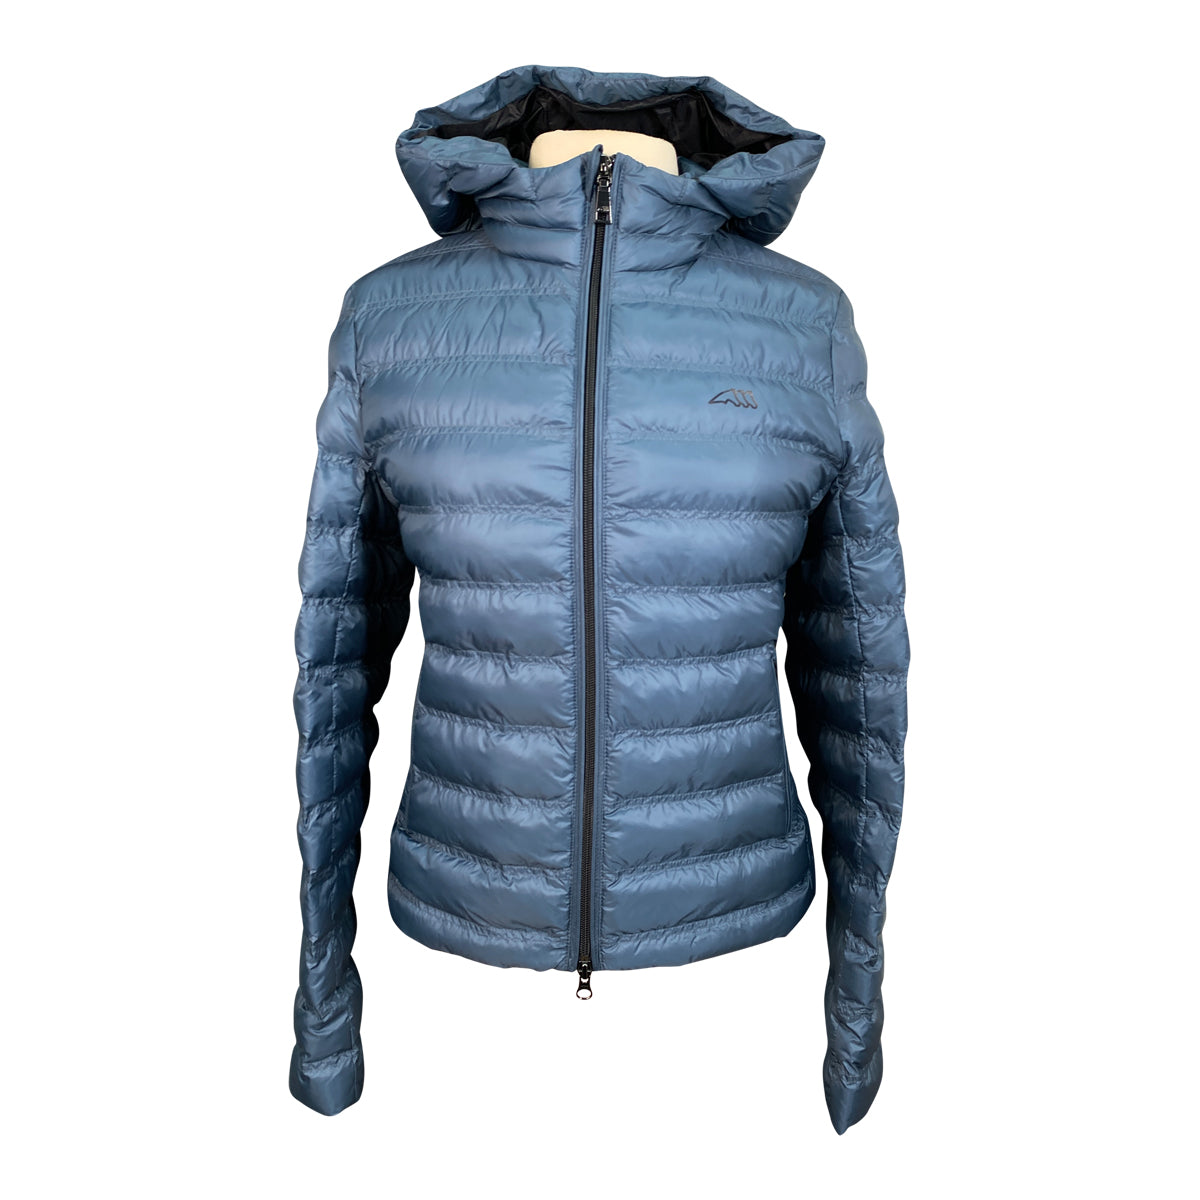 Equiline 'Ecre' Puffer Jacket in Tempest